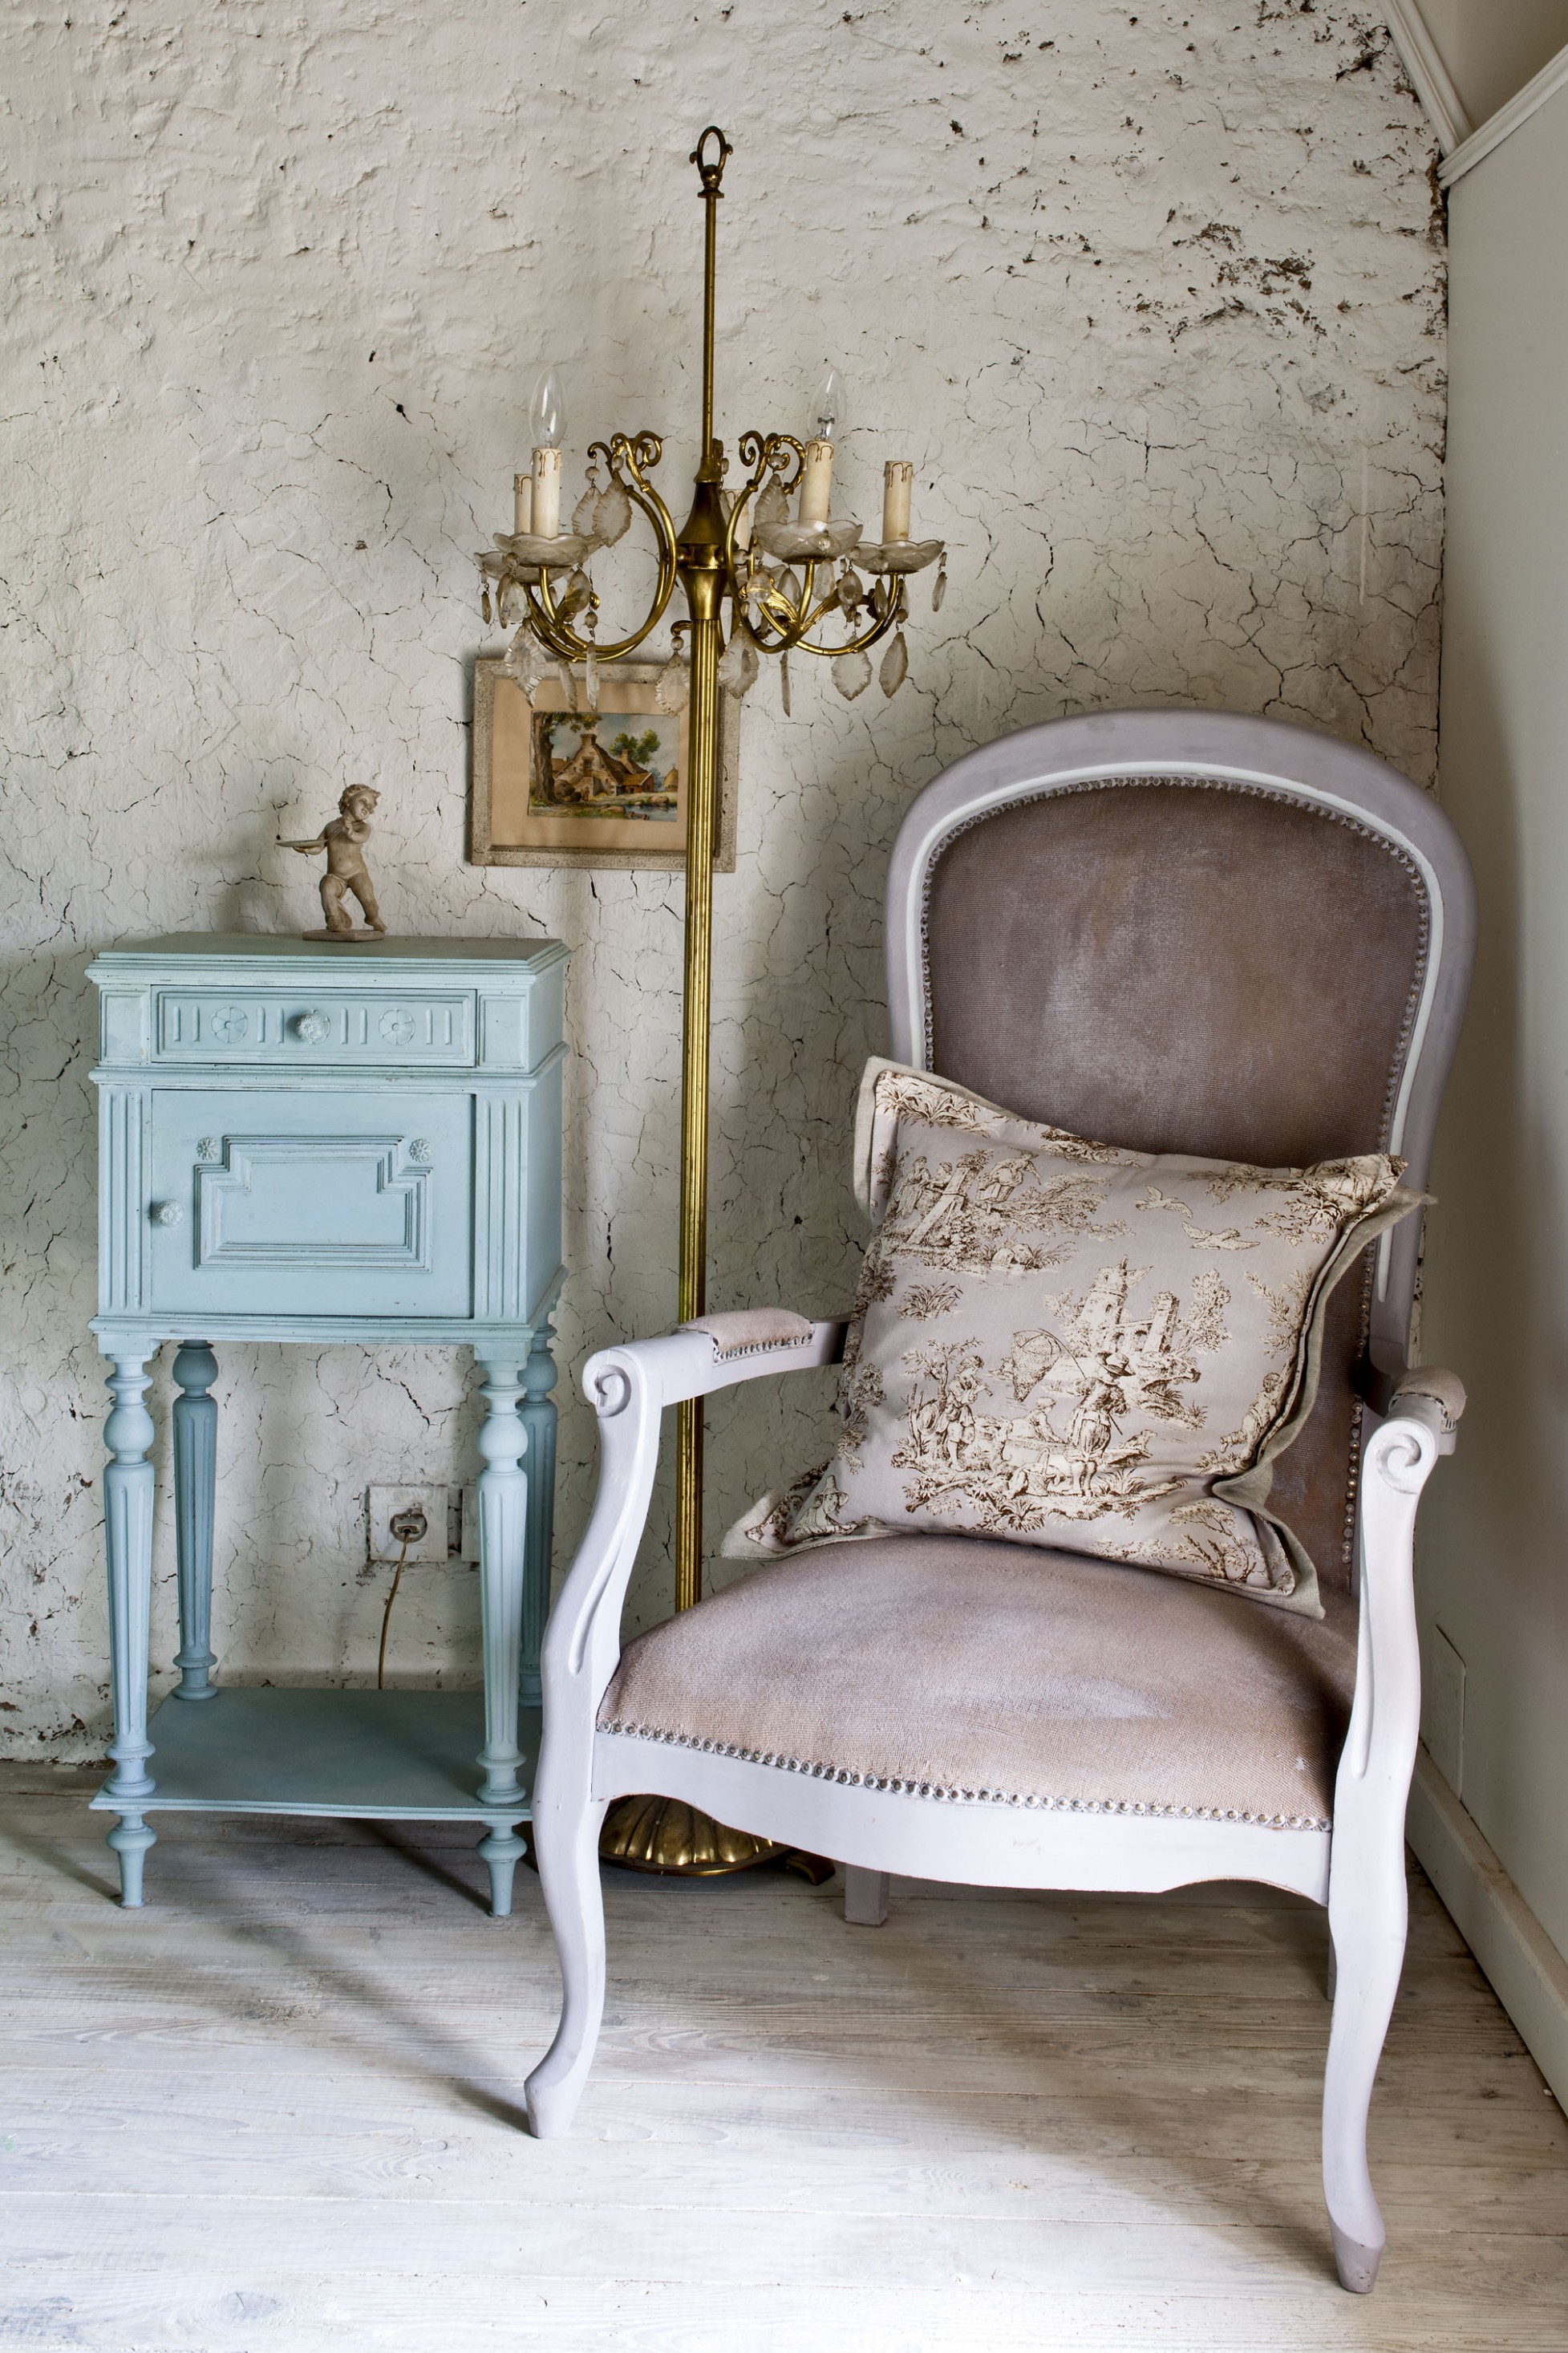 Diy Painting Project: Painting Upholstery And Dyeing Fabric With ..